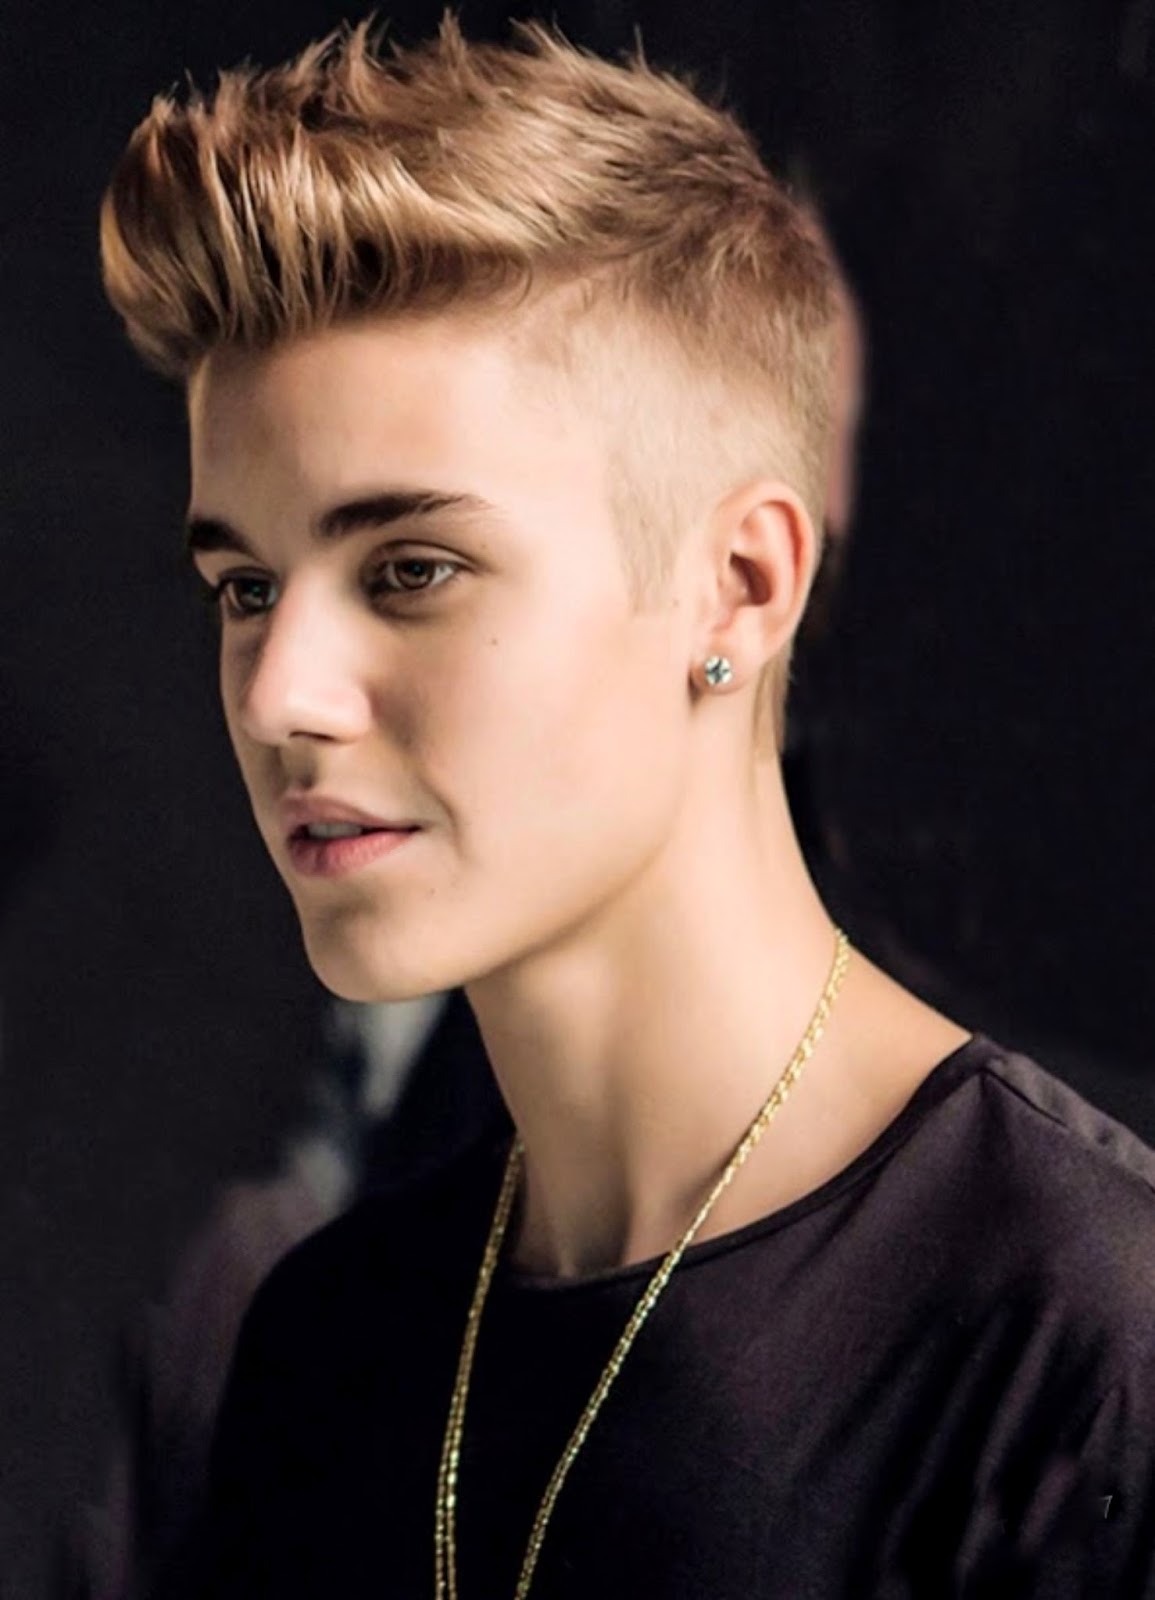 Free download Justin Bieber Latest HD Wallpapers of 2015 Celebrity ...